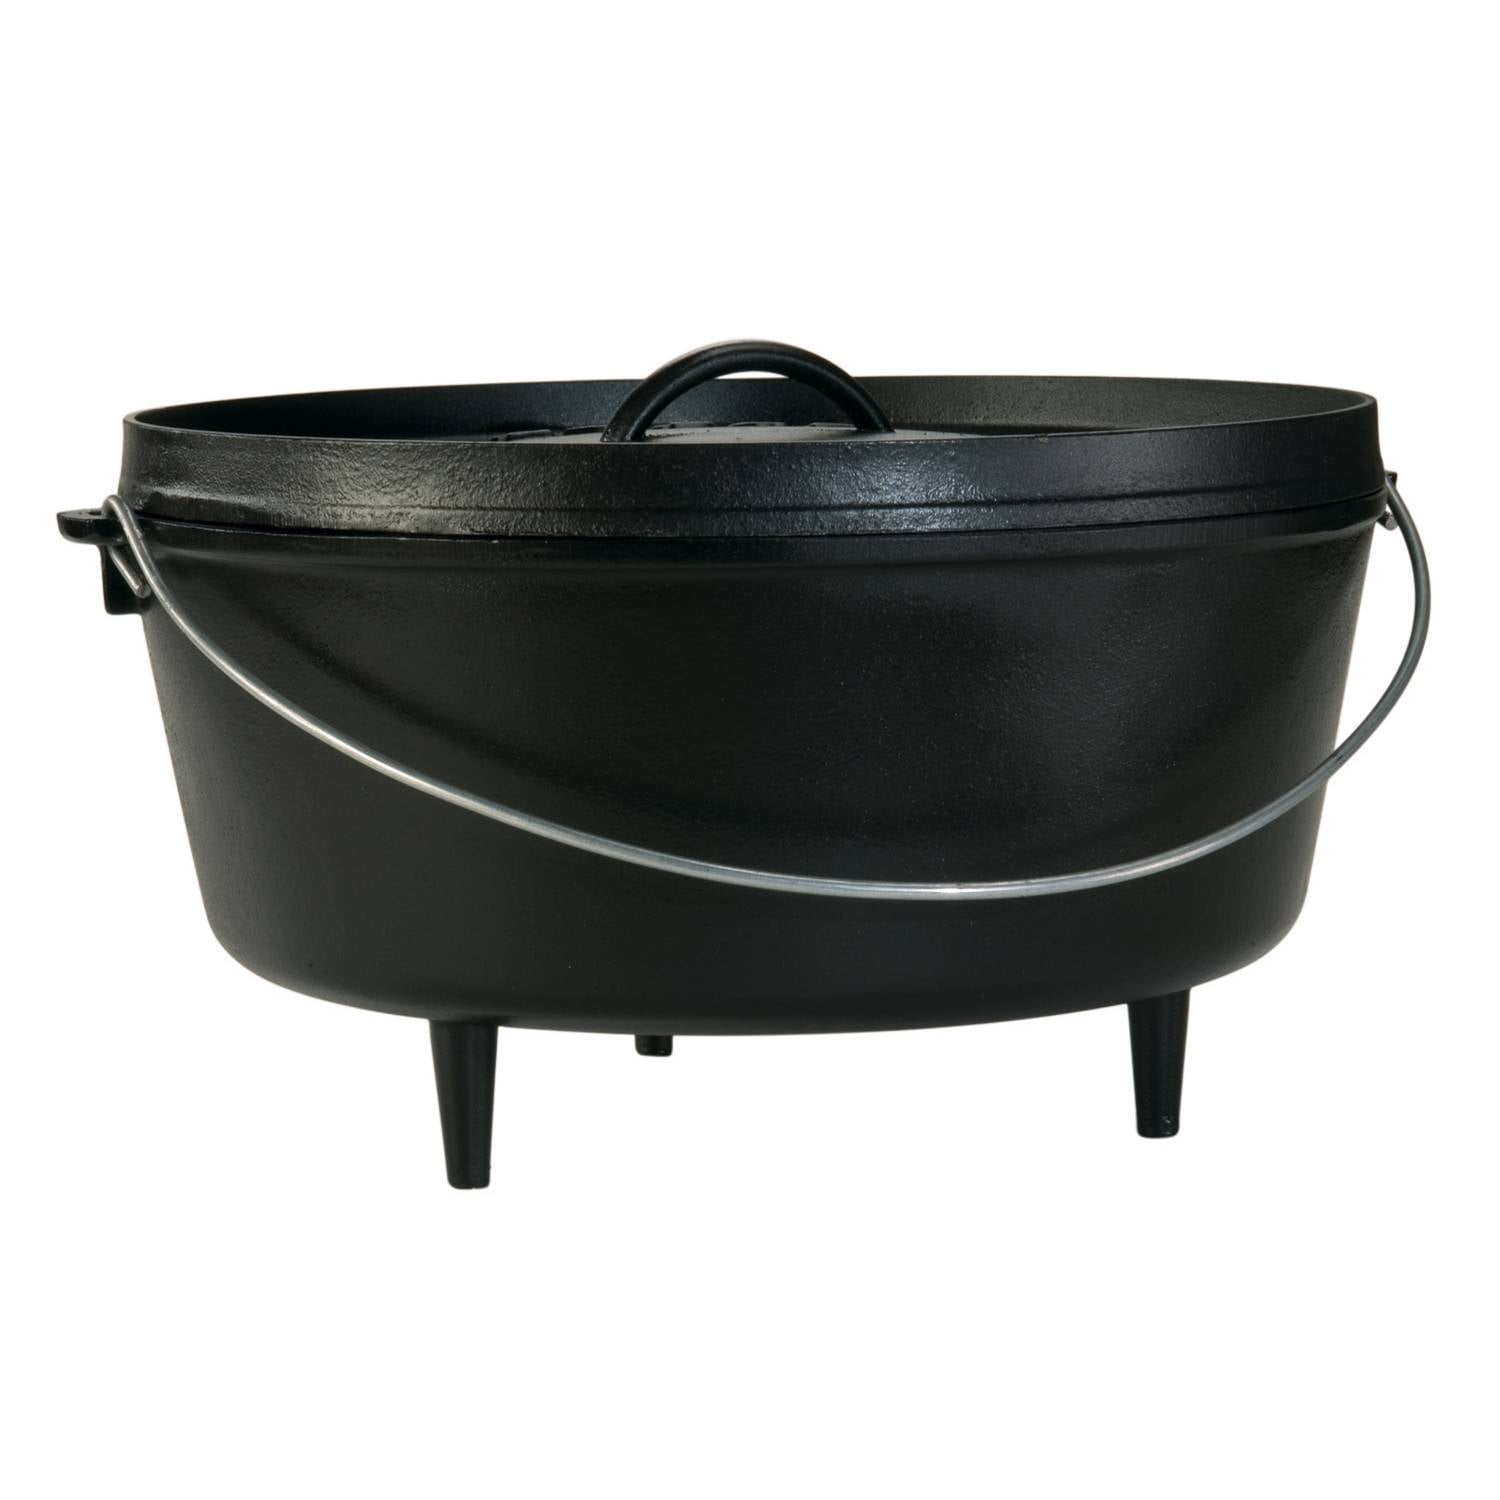 10 Pre-Seasoned 4 Quart Dutch Oven Without Legs - CampMaid